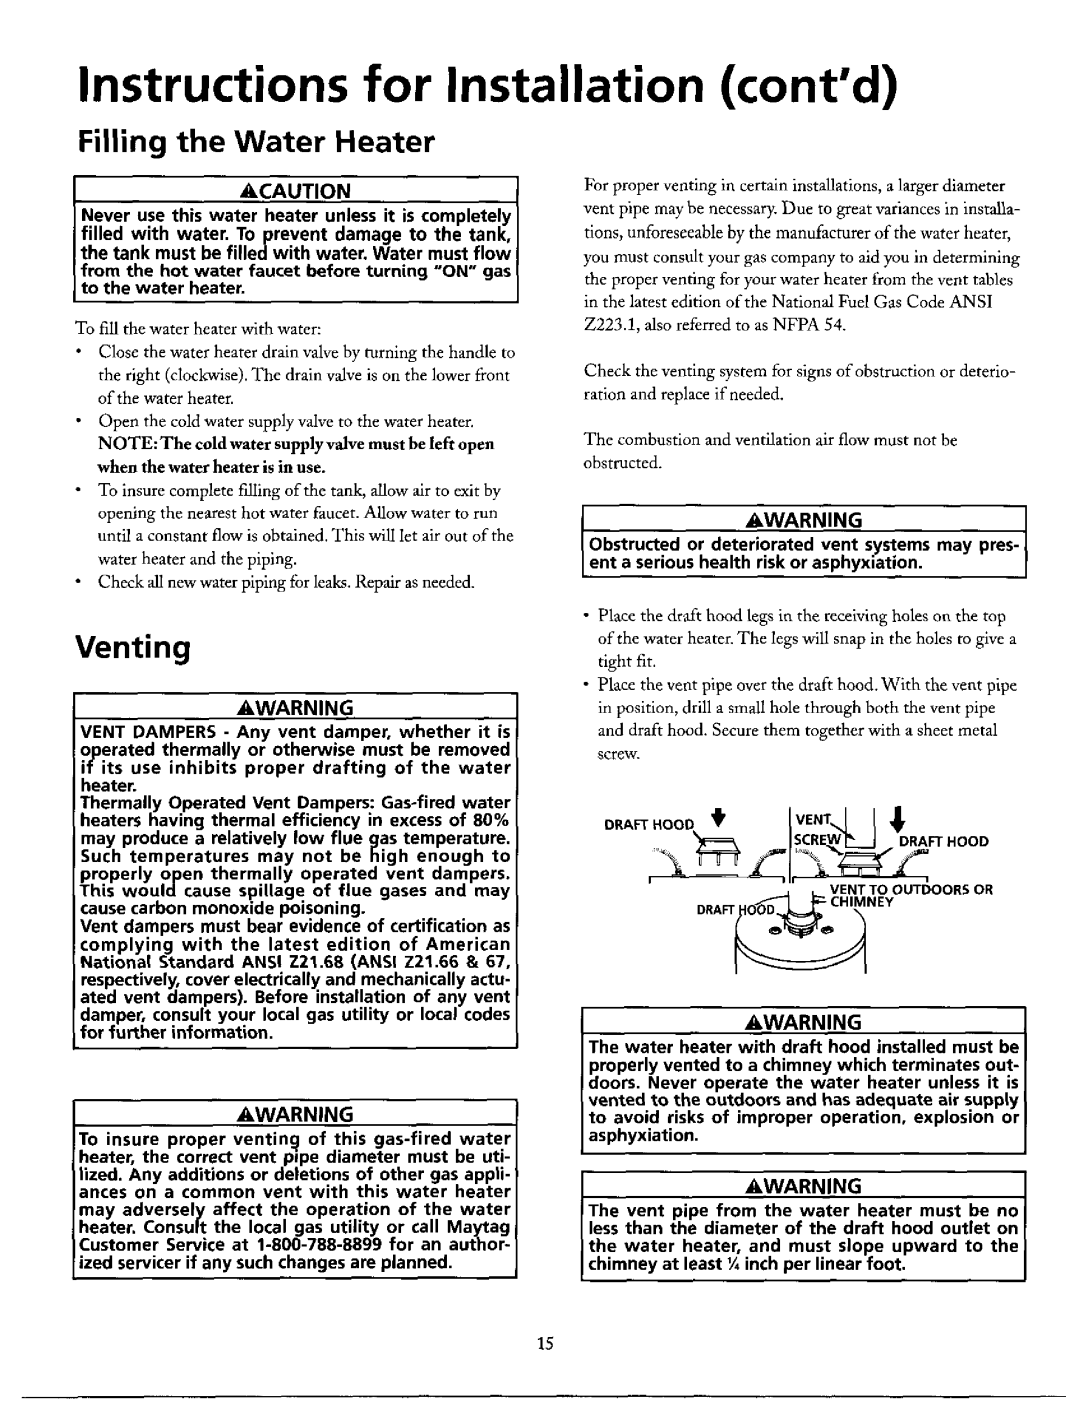 Maytag HN41240X Venting, Filling the Water Heater, Instructions for Installation contd, of the water, heater. The, them 